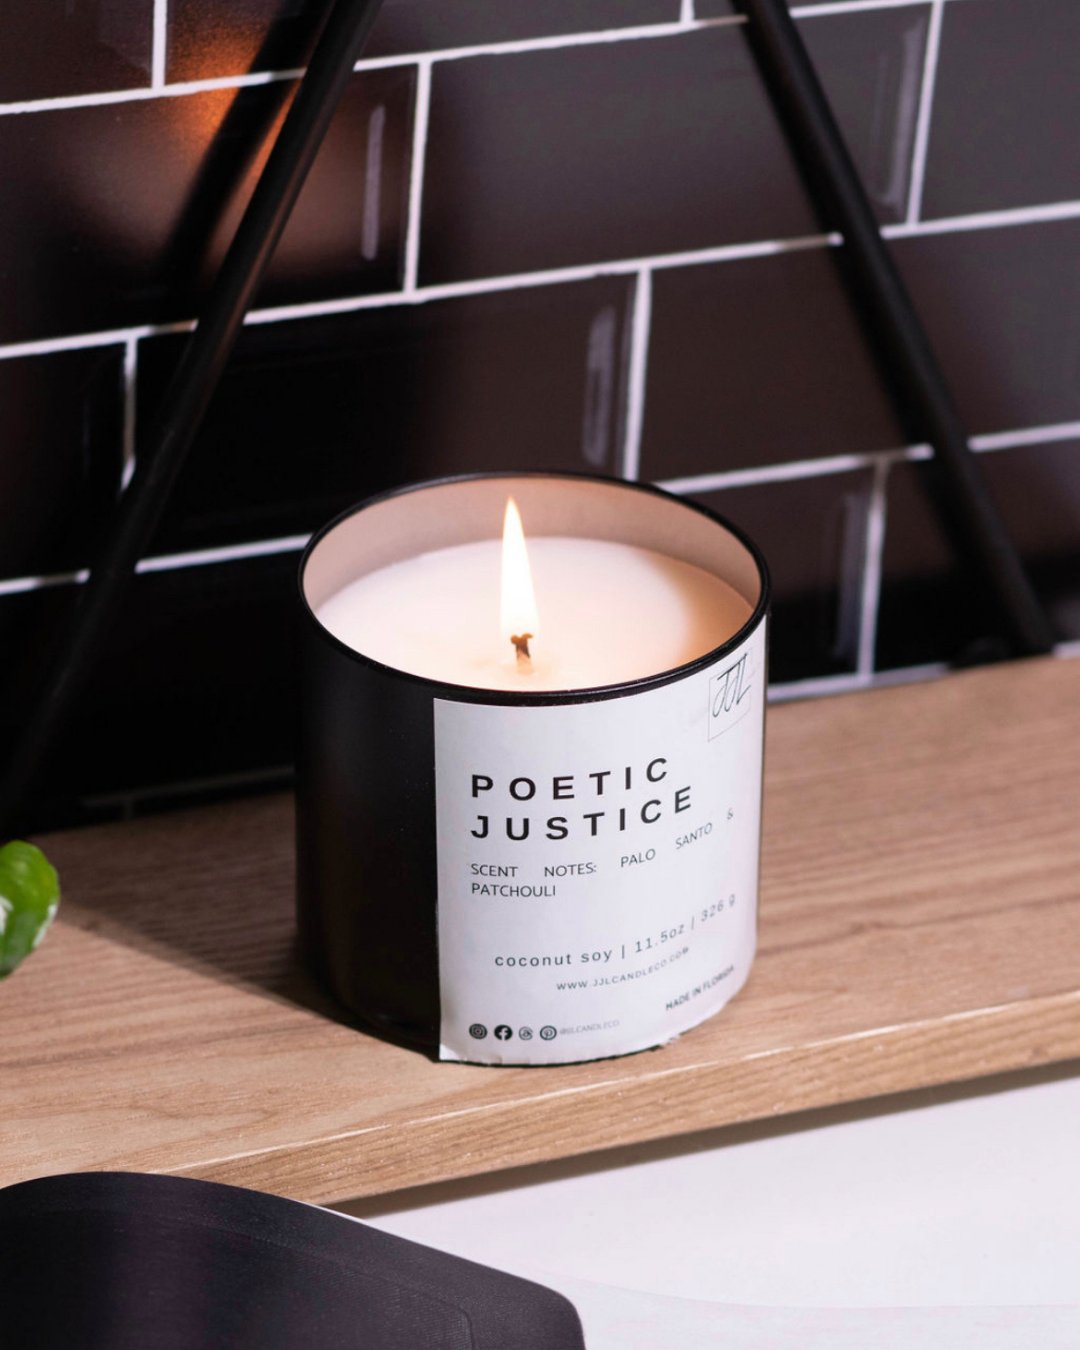 Poetic Justice - J.J.L. Candle Co.